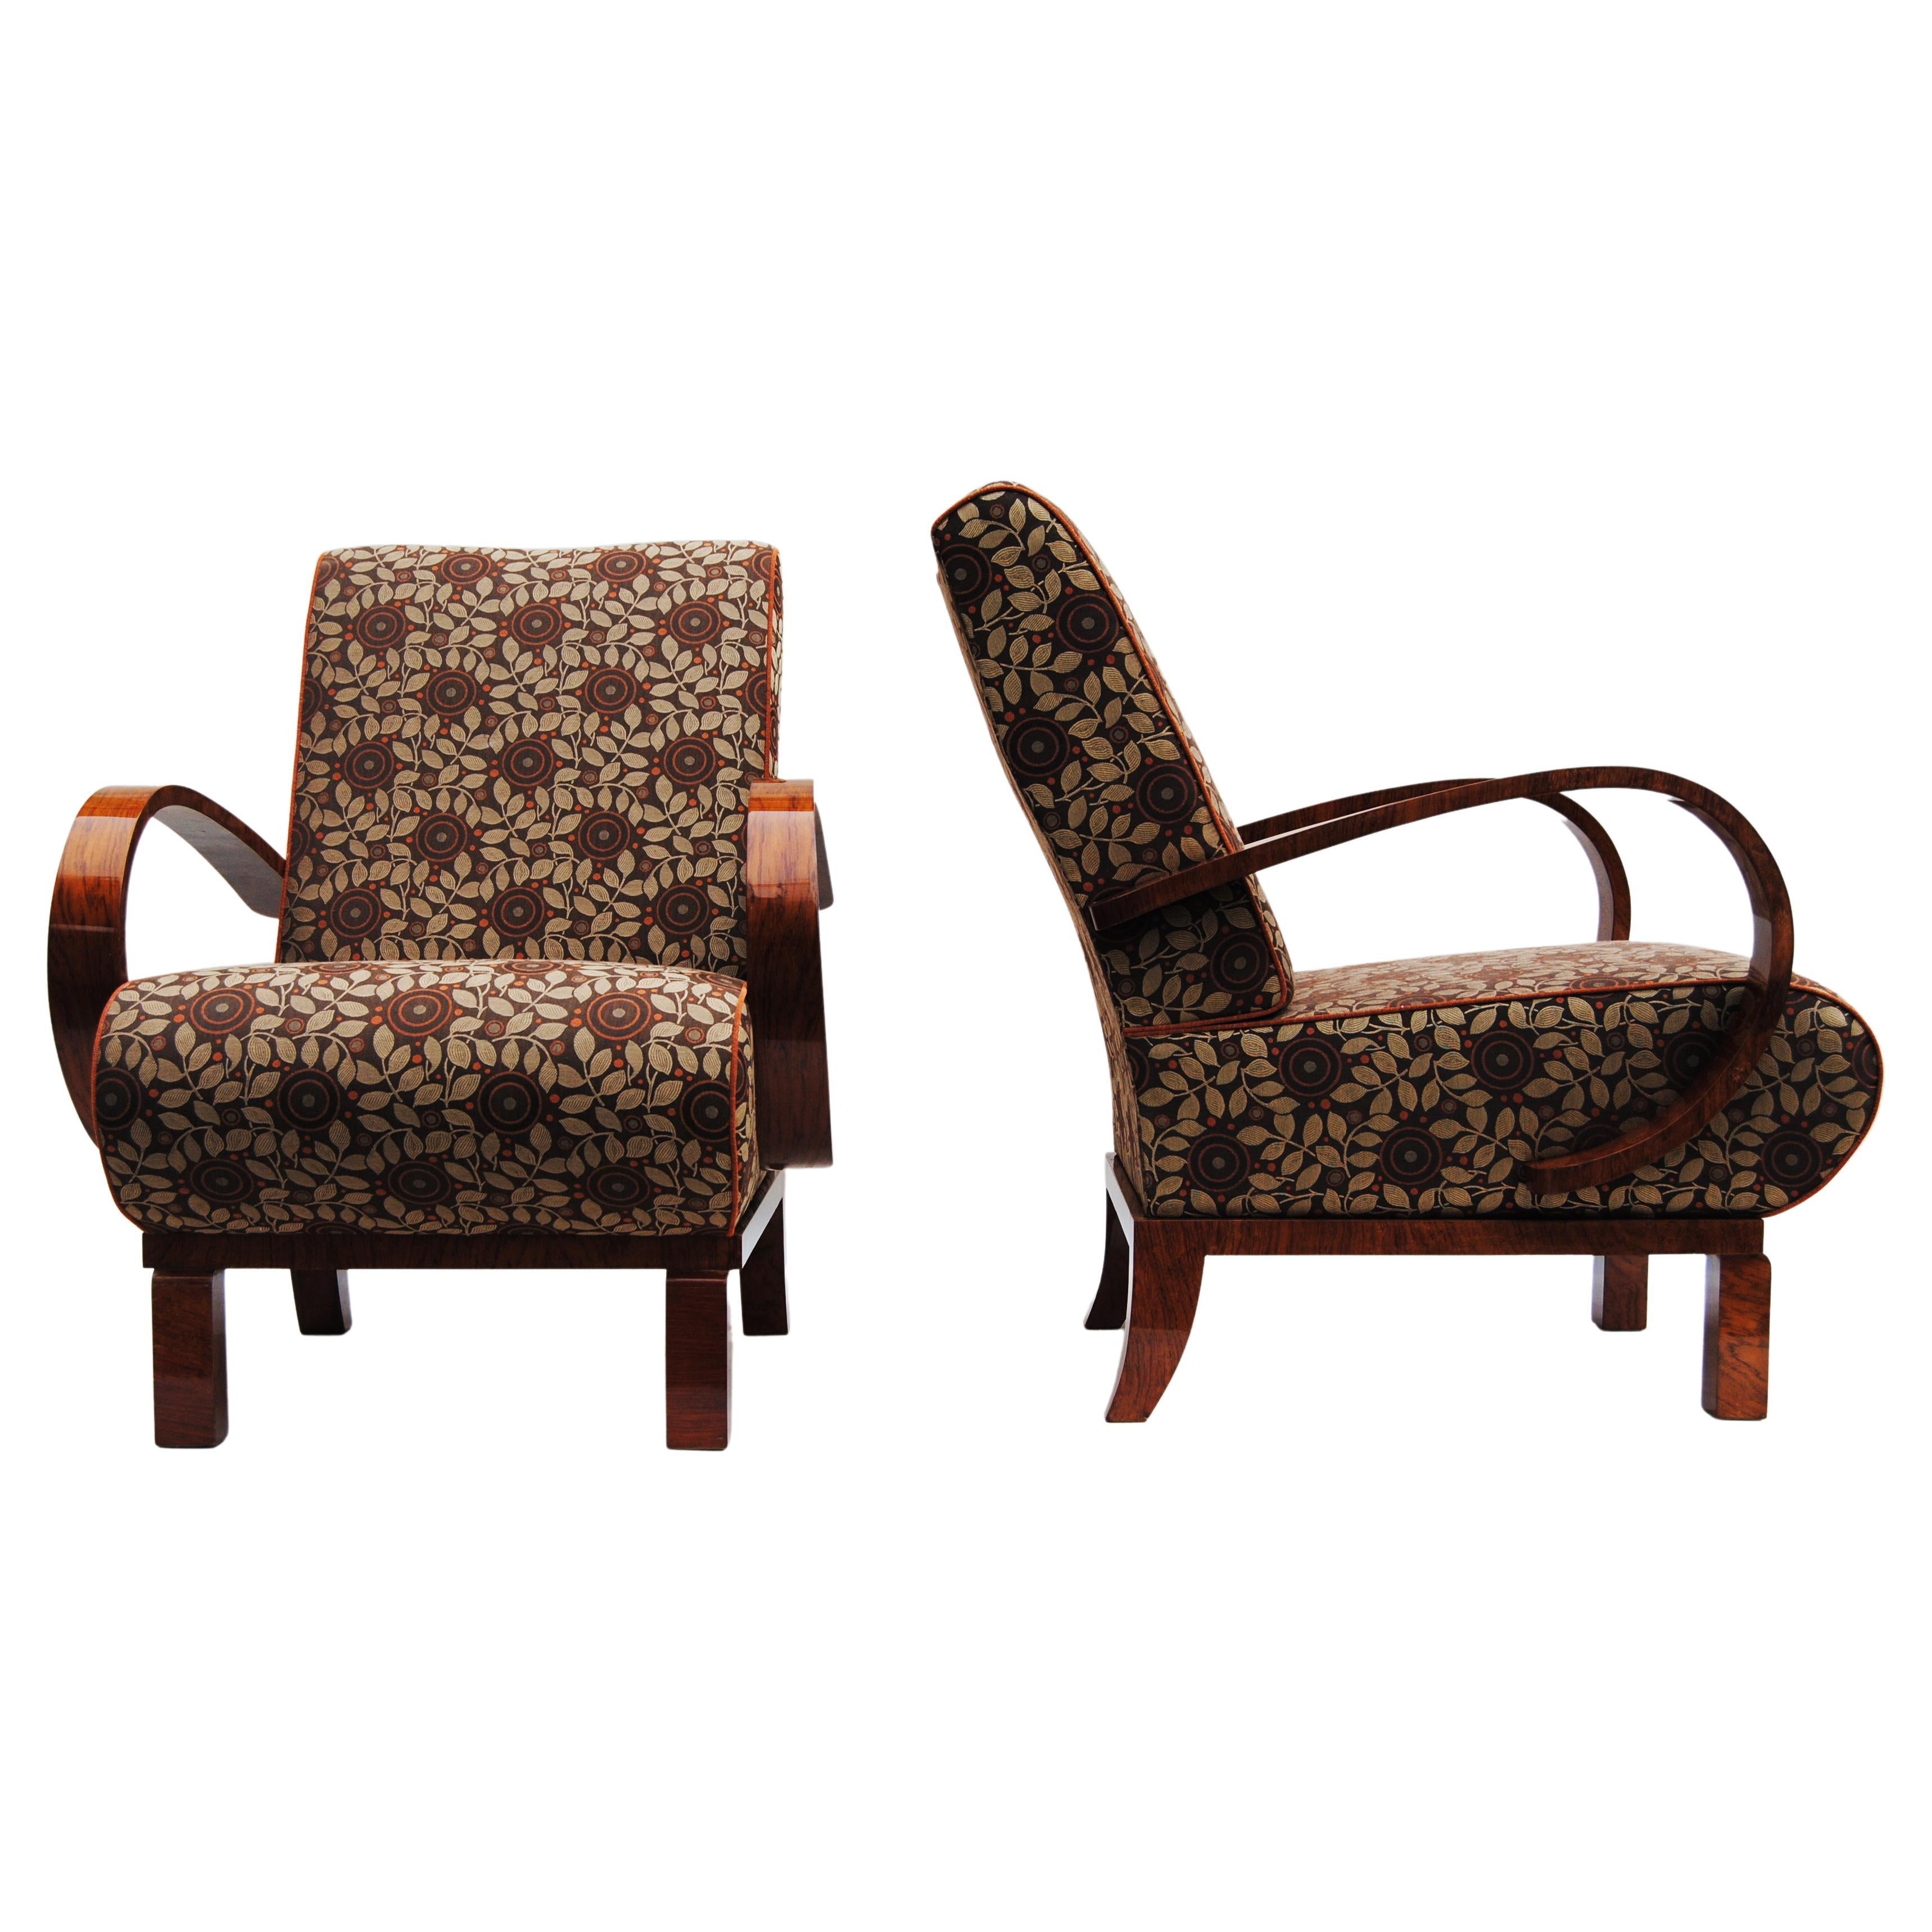 Completely Restored Pair of Art Deco Armchairs, New Upholstery, High Gloss For Sale